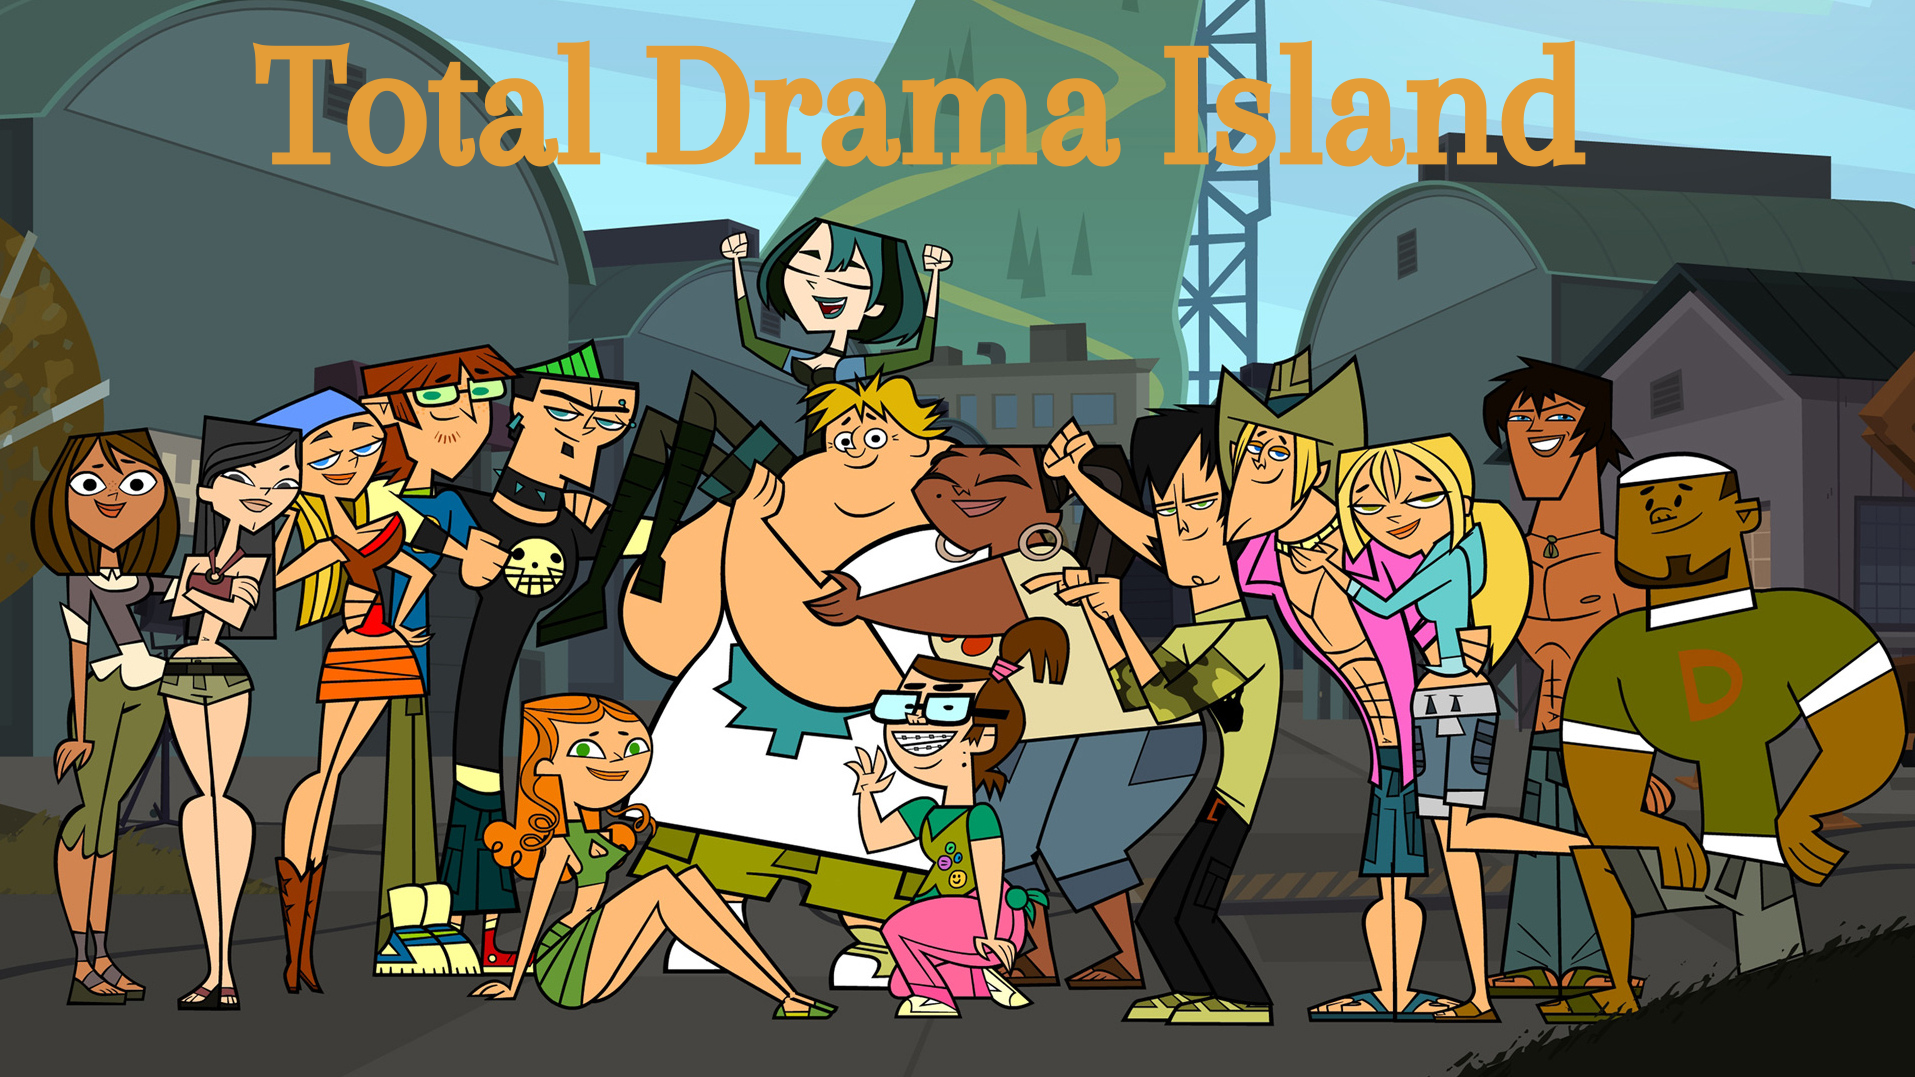 Major characters in Total Drama Island